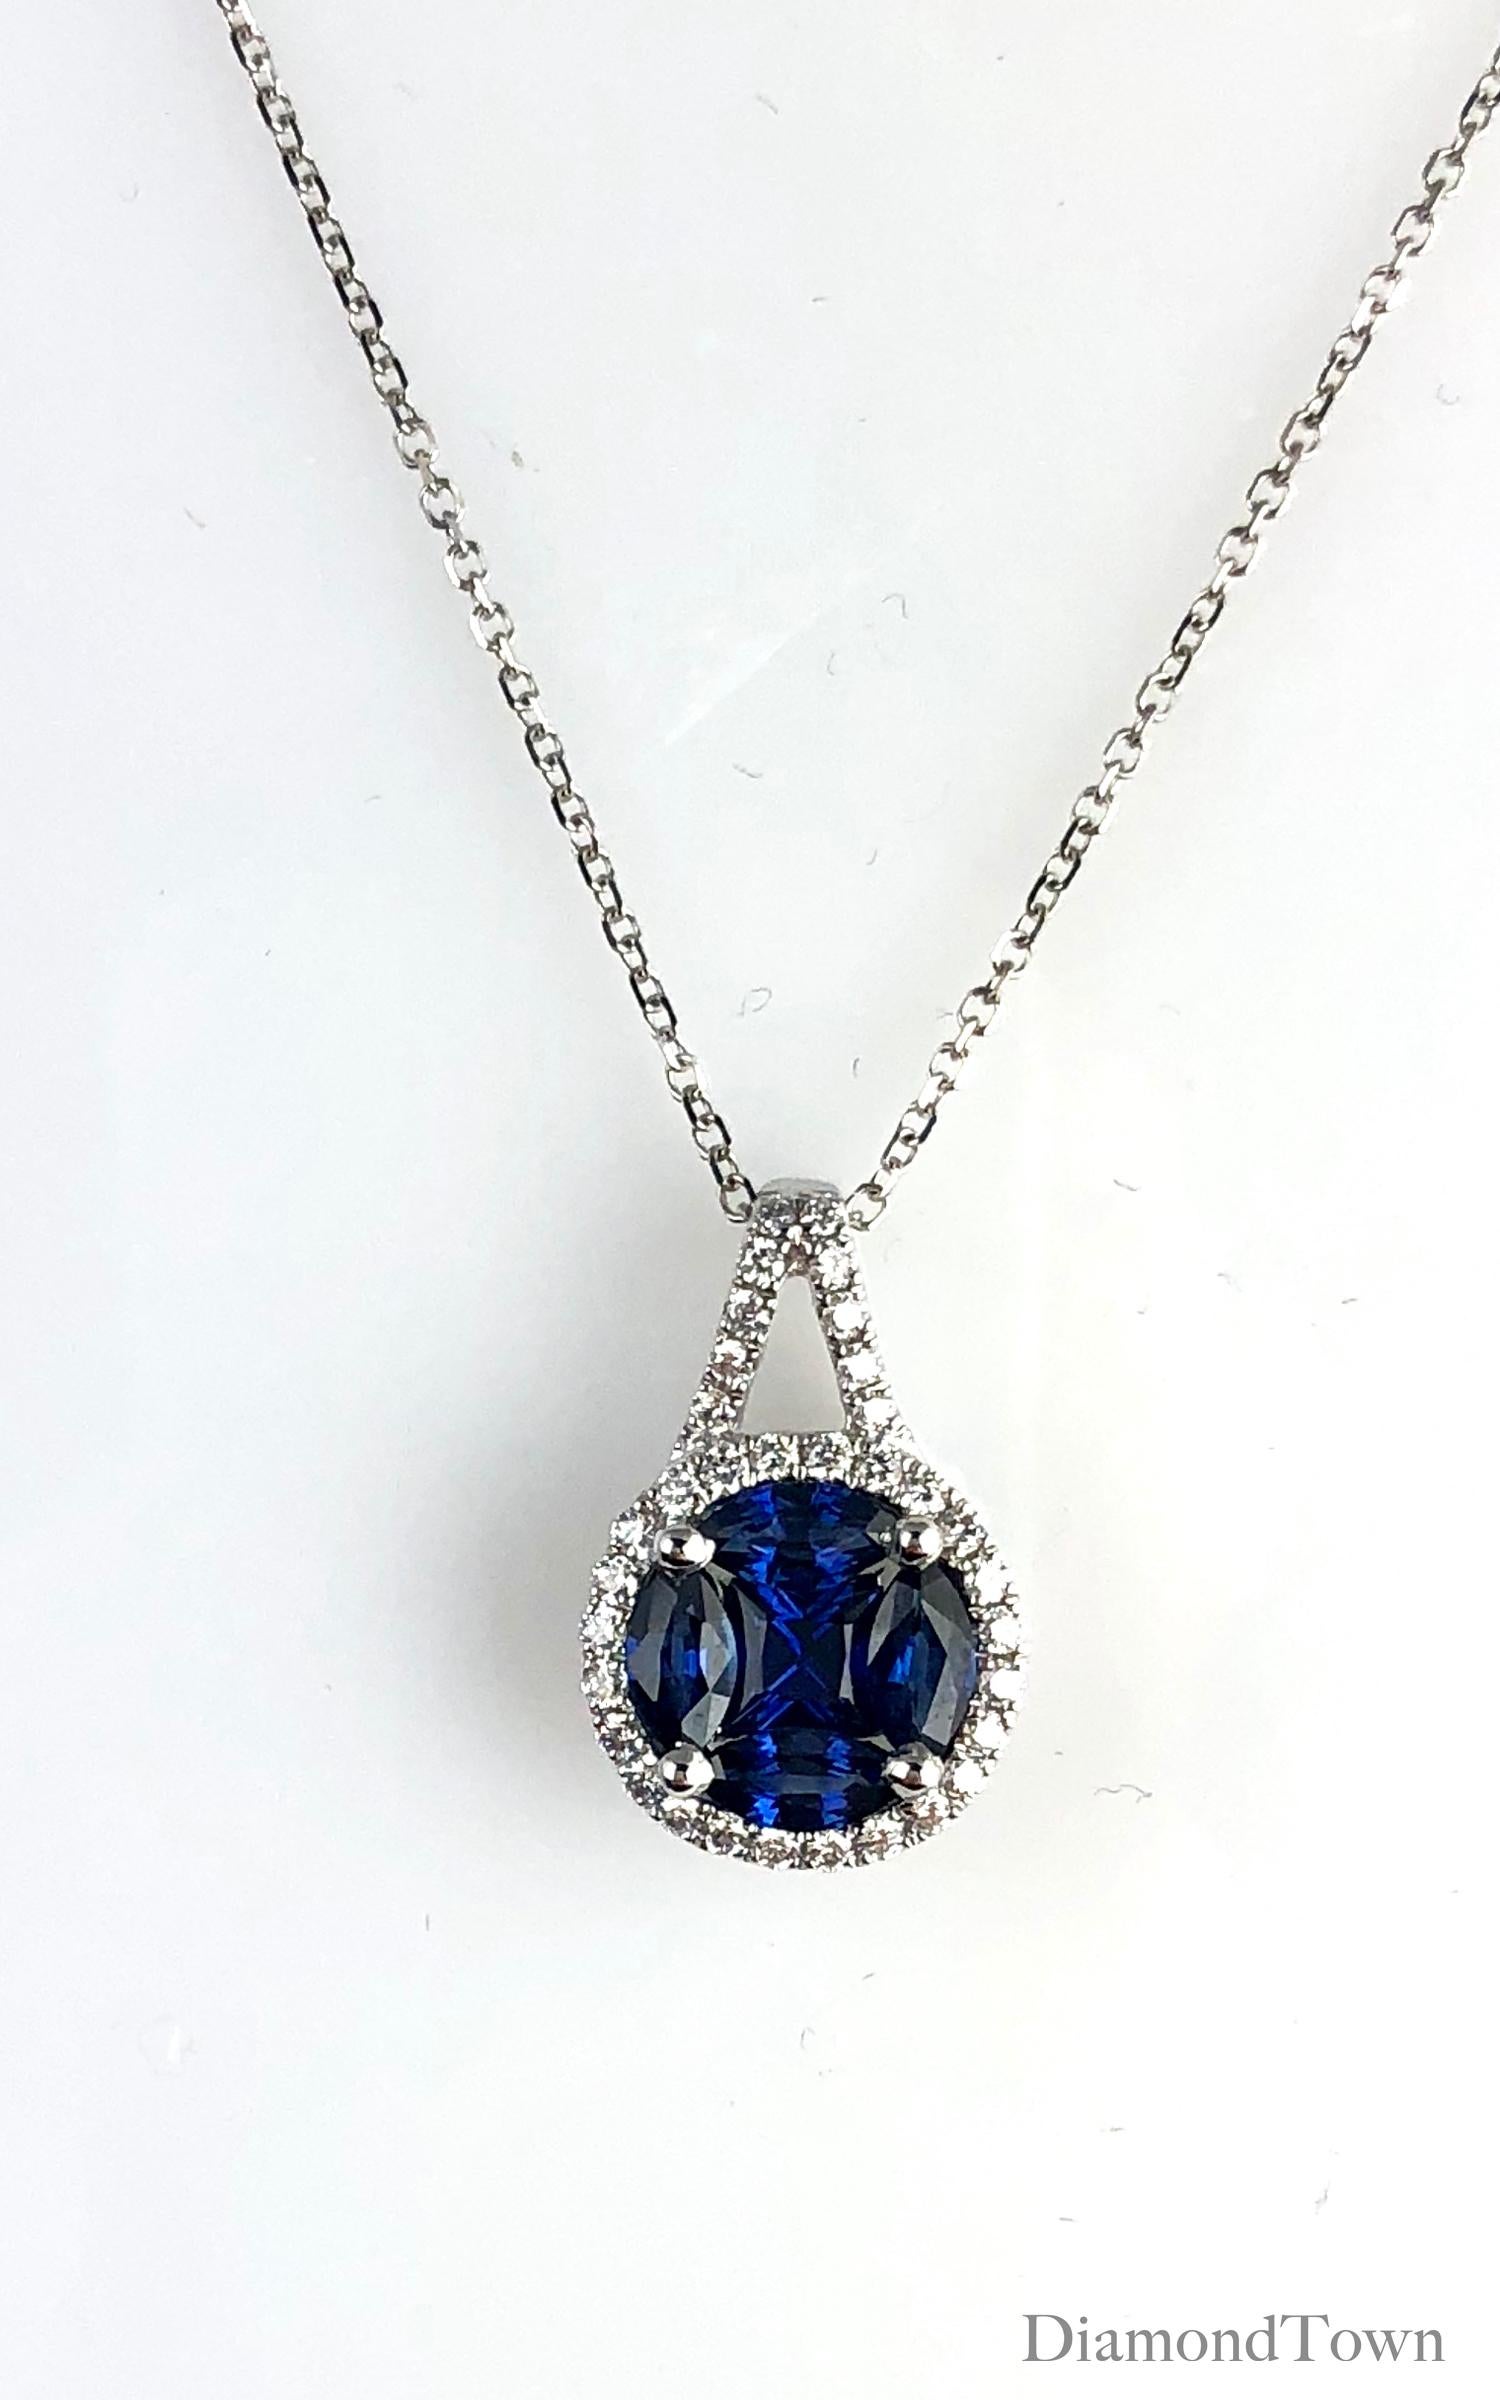 This pendant features a vivid blue sapphire cluster center (5 stones, total weight 0.82 carats) surrounded by a halo of round white diamonds, which also extend up the bail. Total diamond weight 0.17 carats.

Set in 18k White Gold

Matching earrings